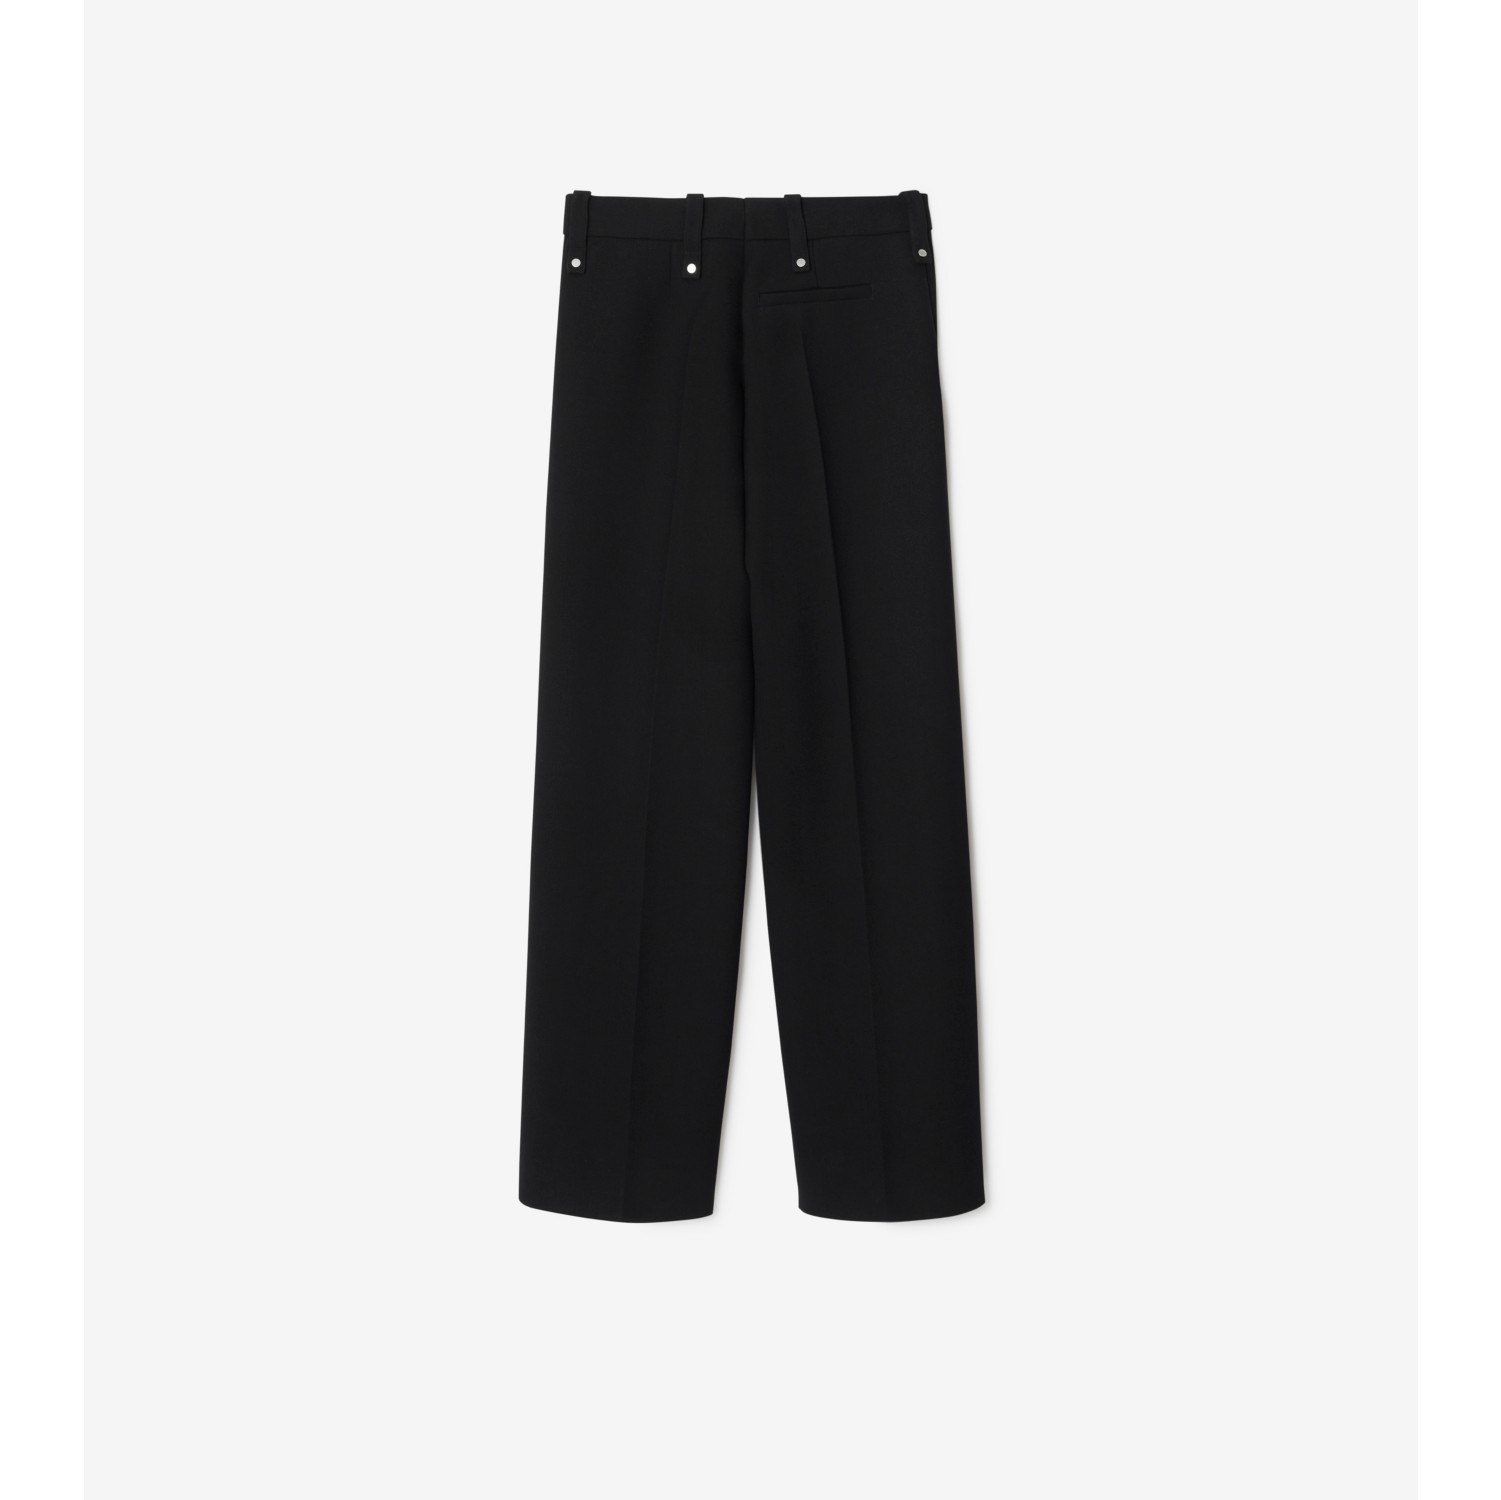 Black wool straight pants with silver stripes